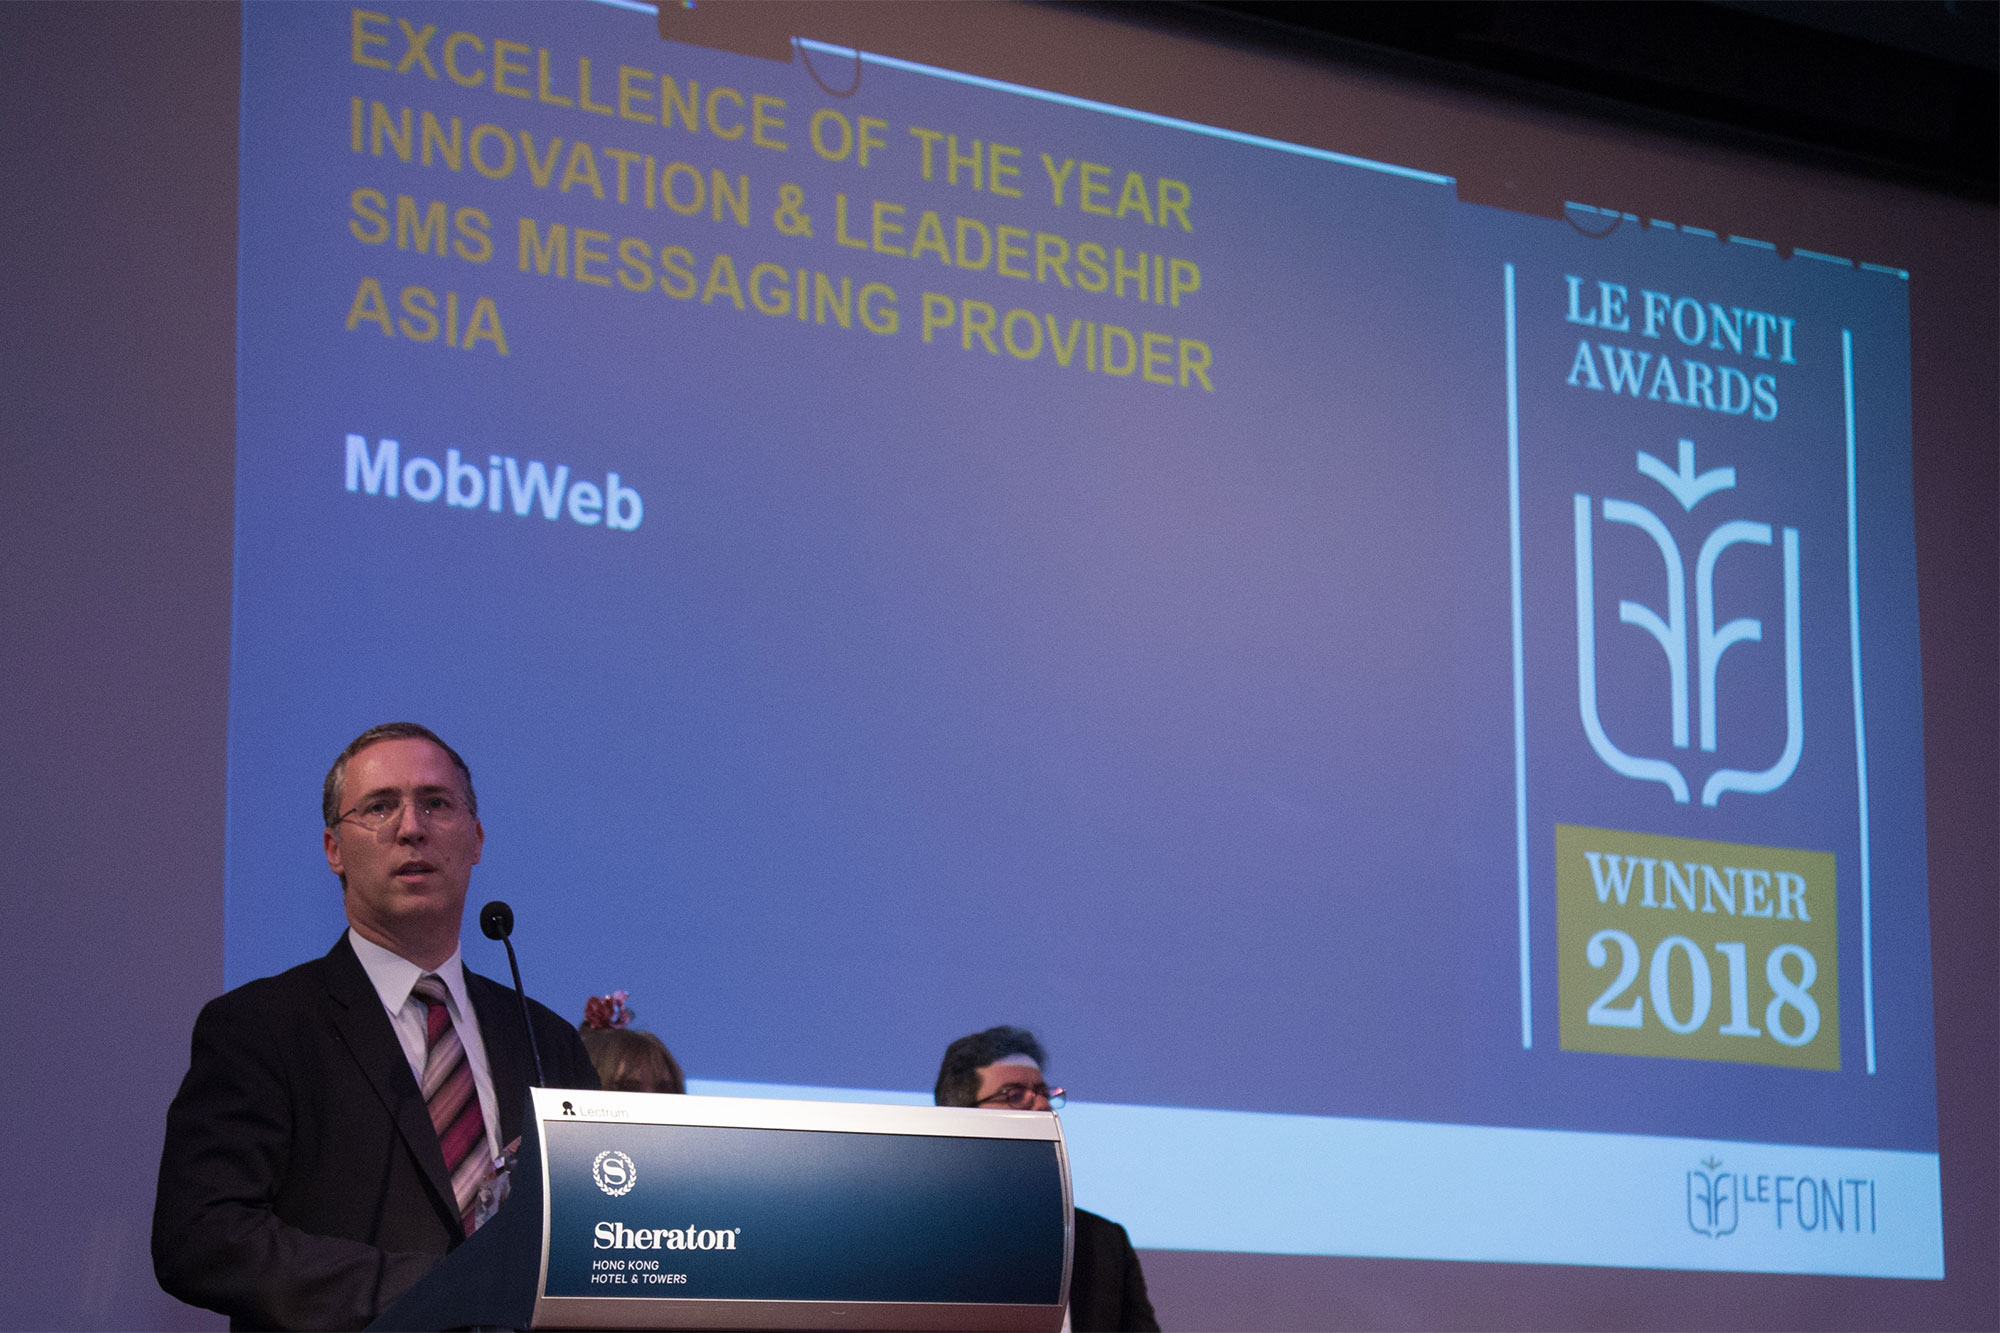 MobiWeb Awarded Excellence in Innovation and Leadership SMS Messaging Provider Asia at the Le Fonti Hong Kong 2018 Awards